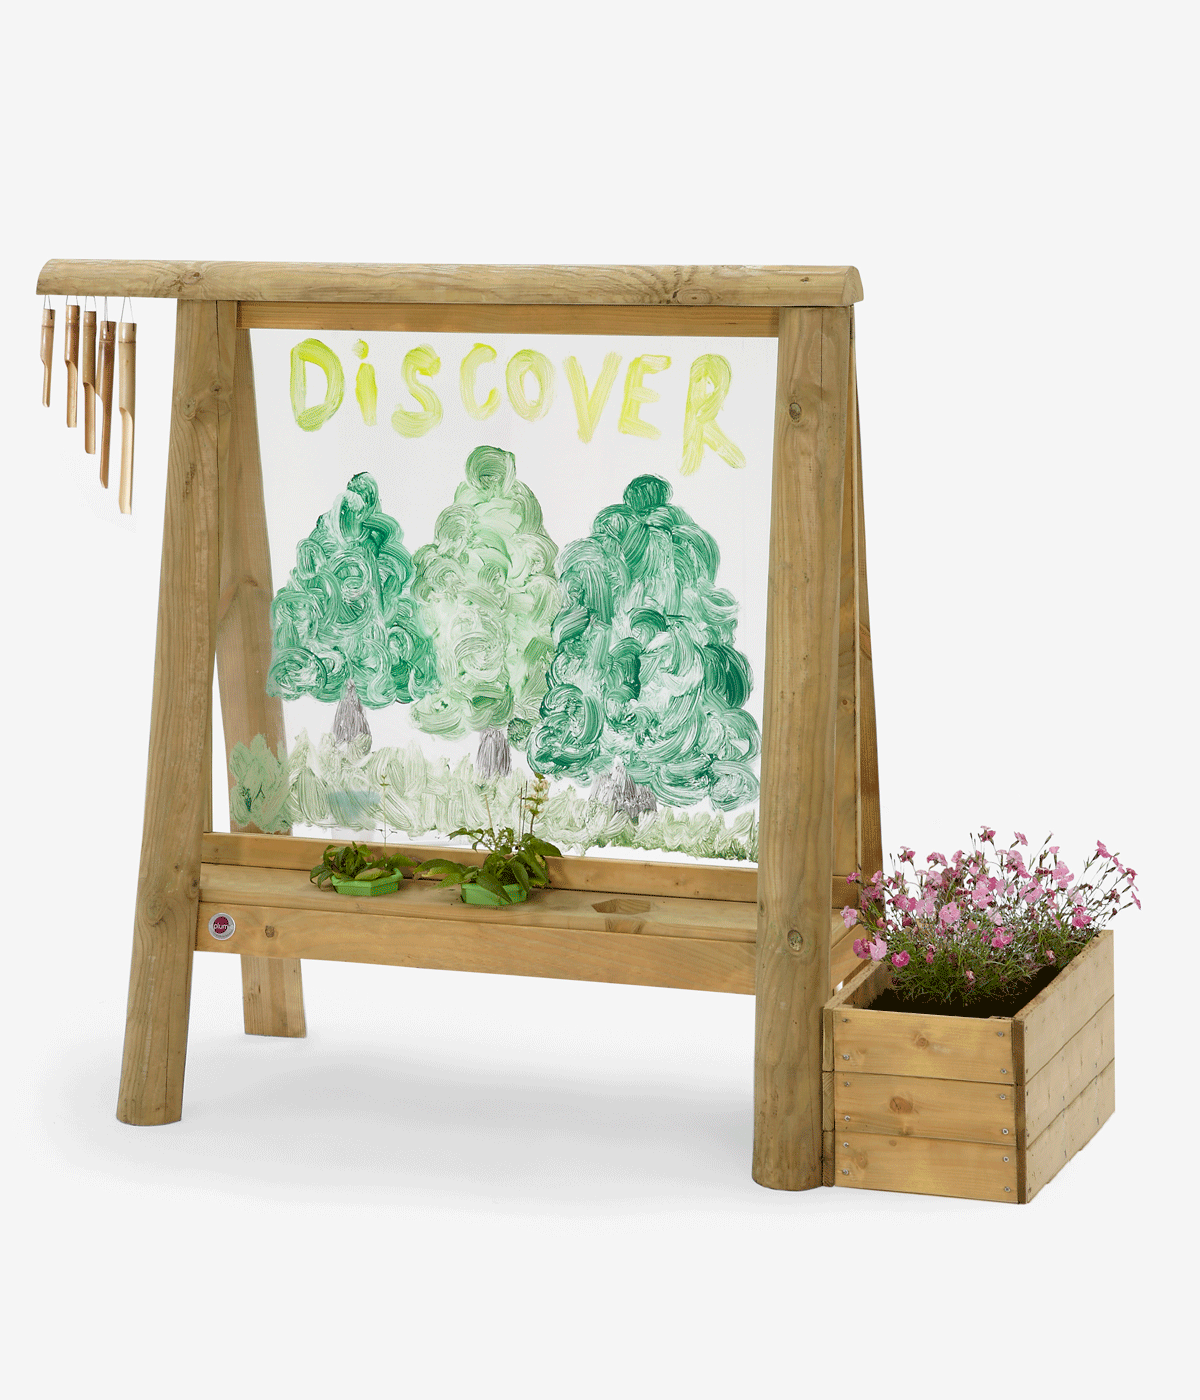 children's wooden easel with wind chimes hanging off